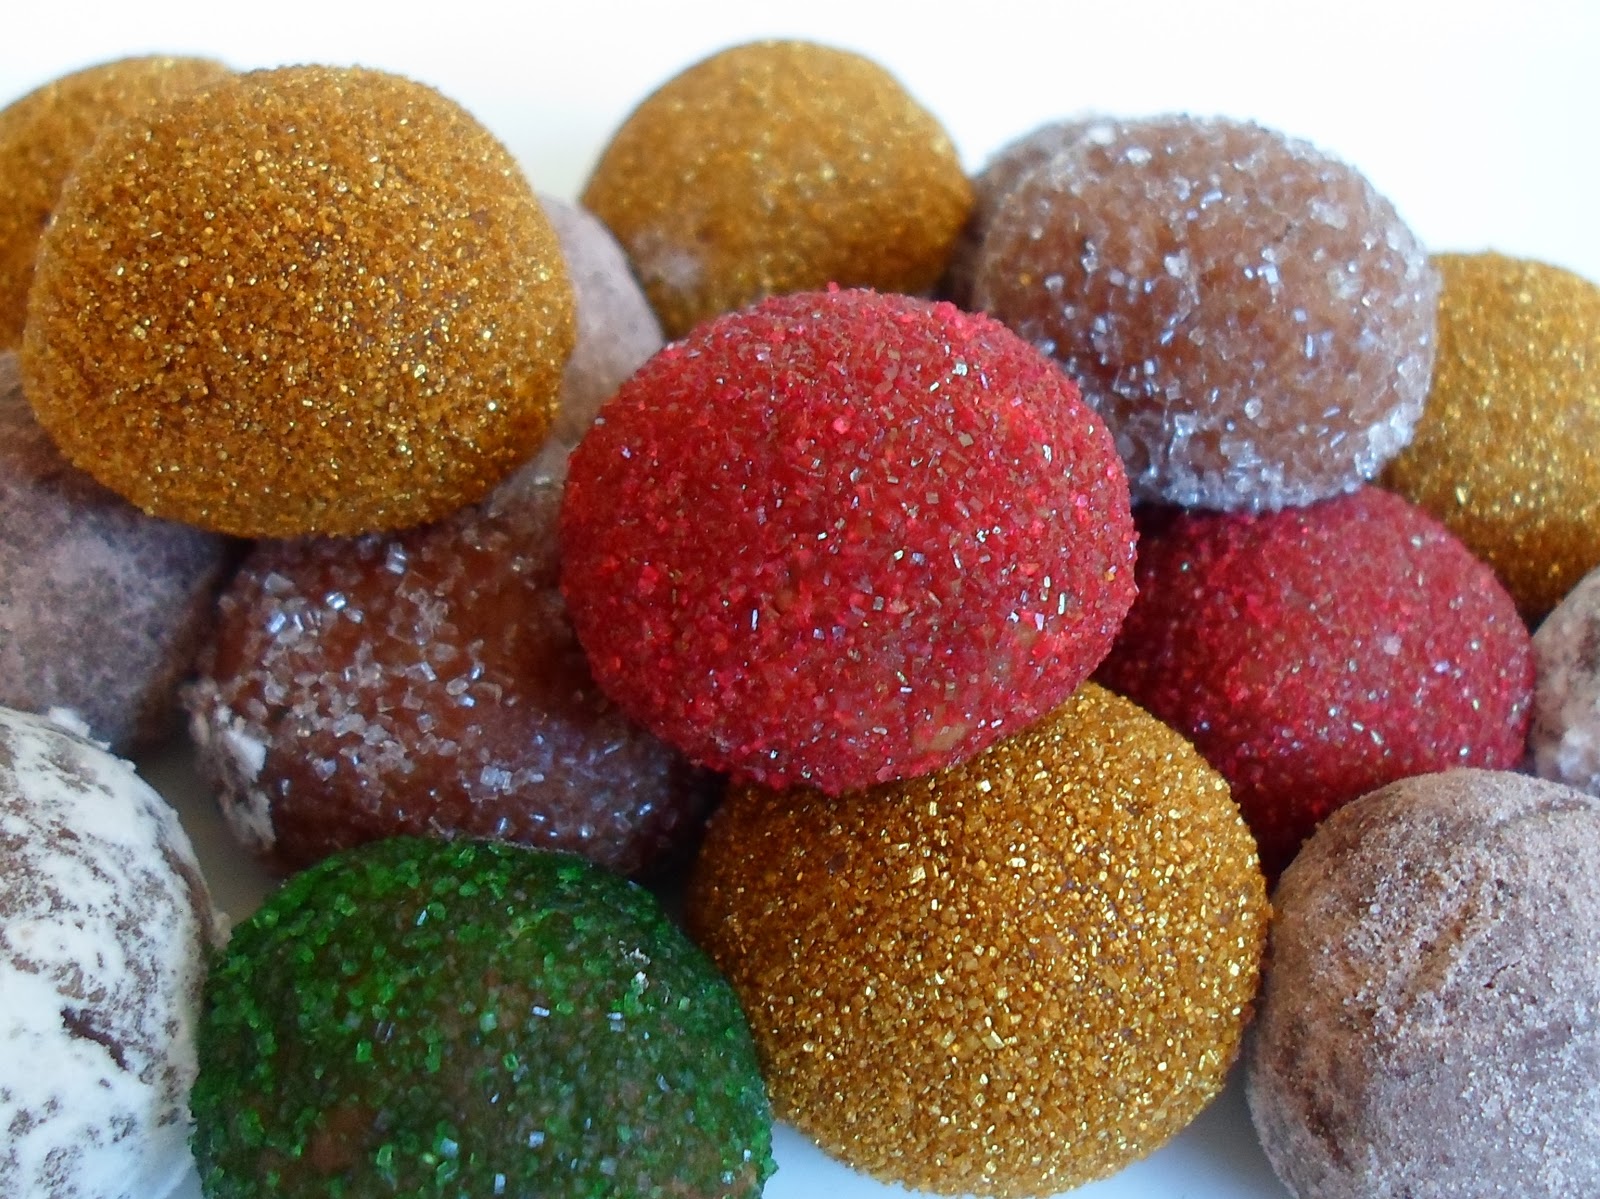 Bake-it-yourself - Edible red glitter